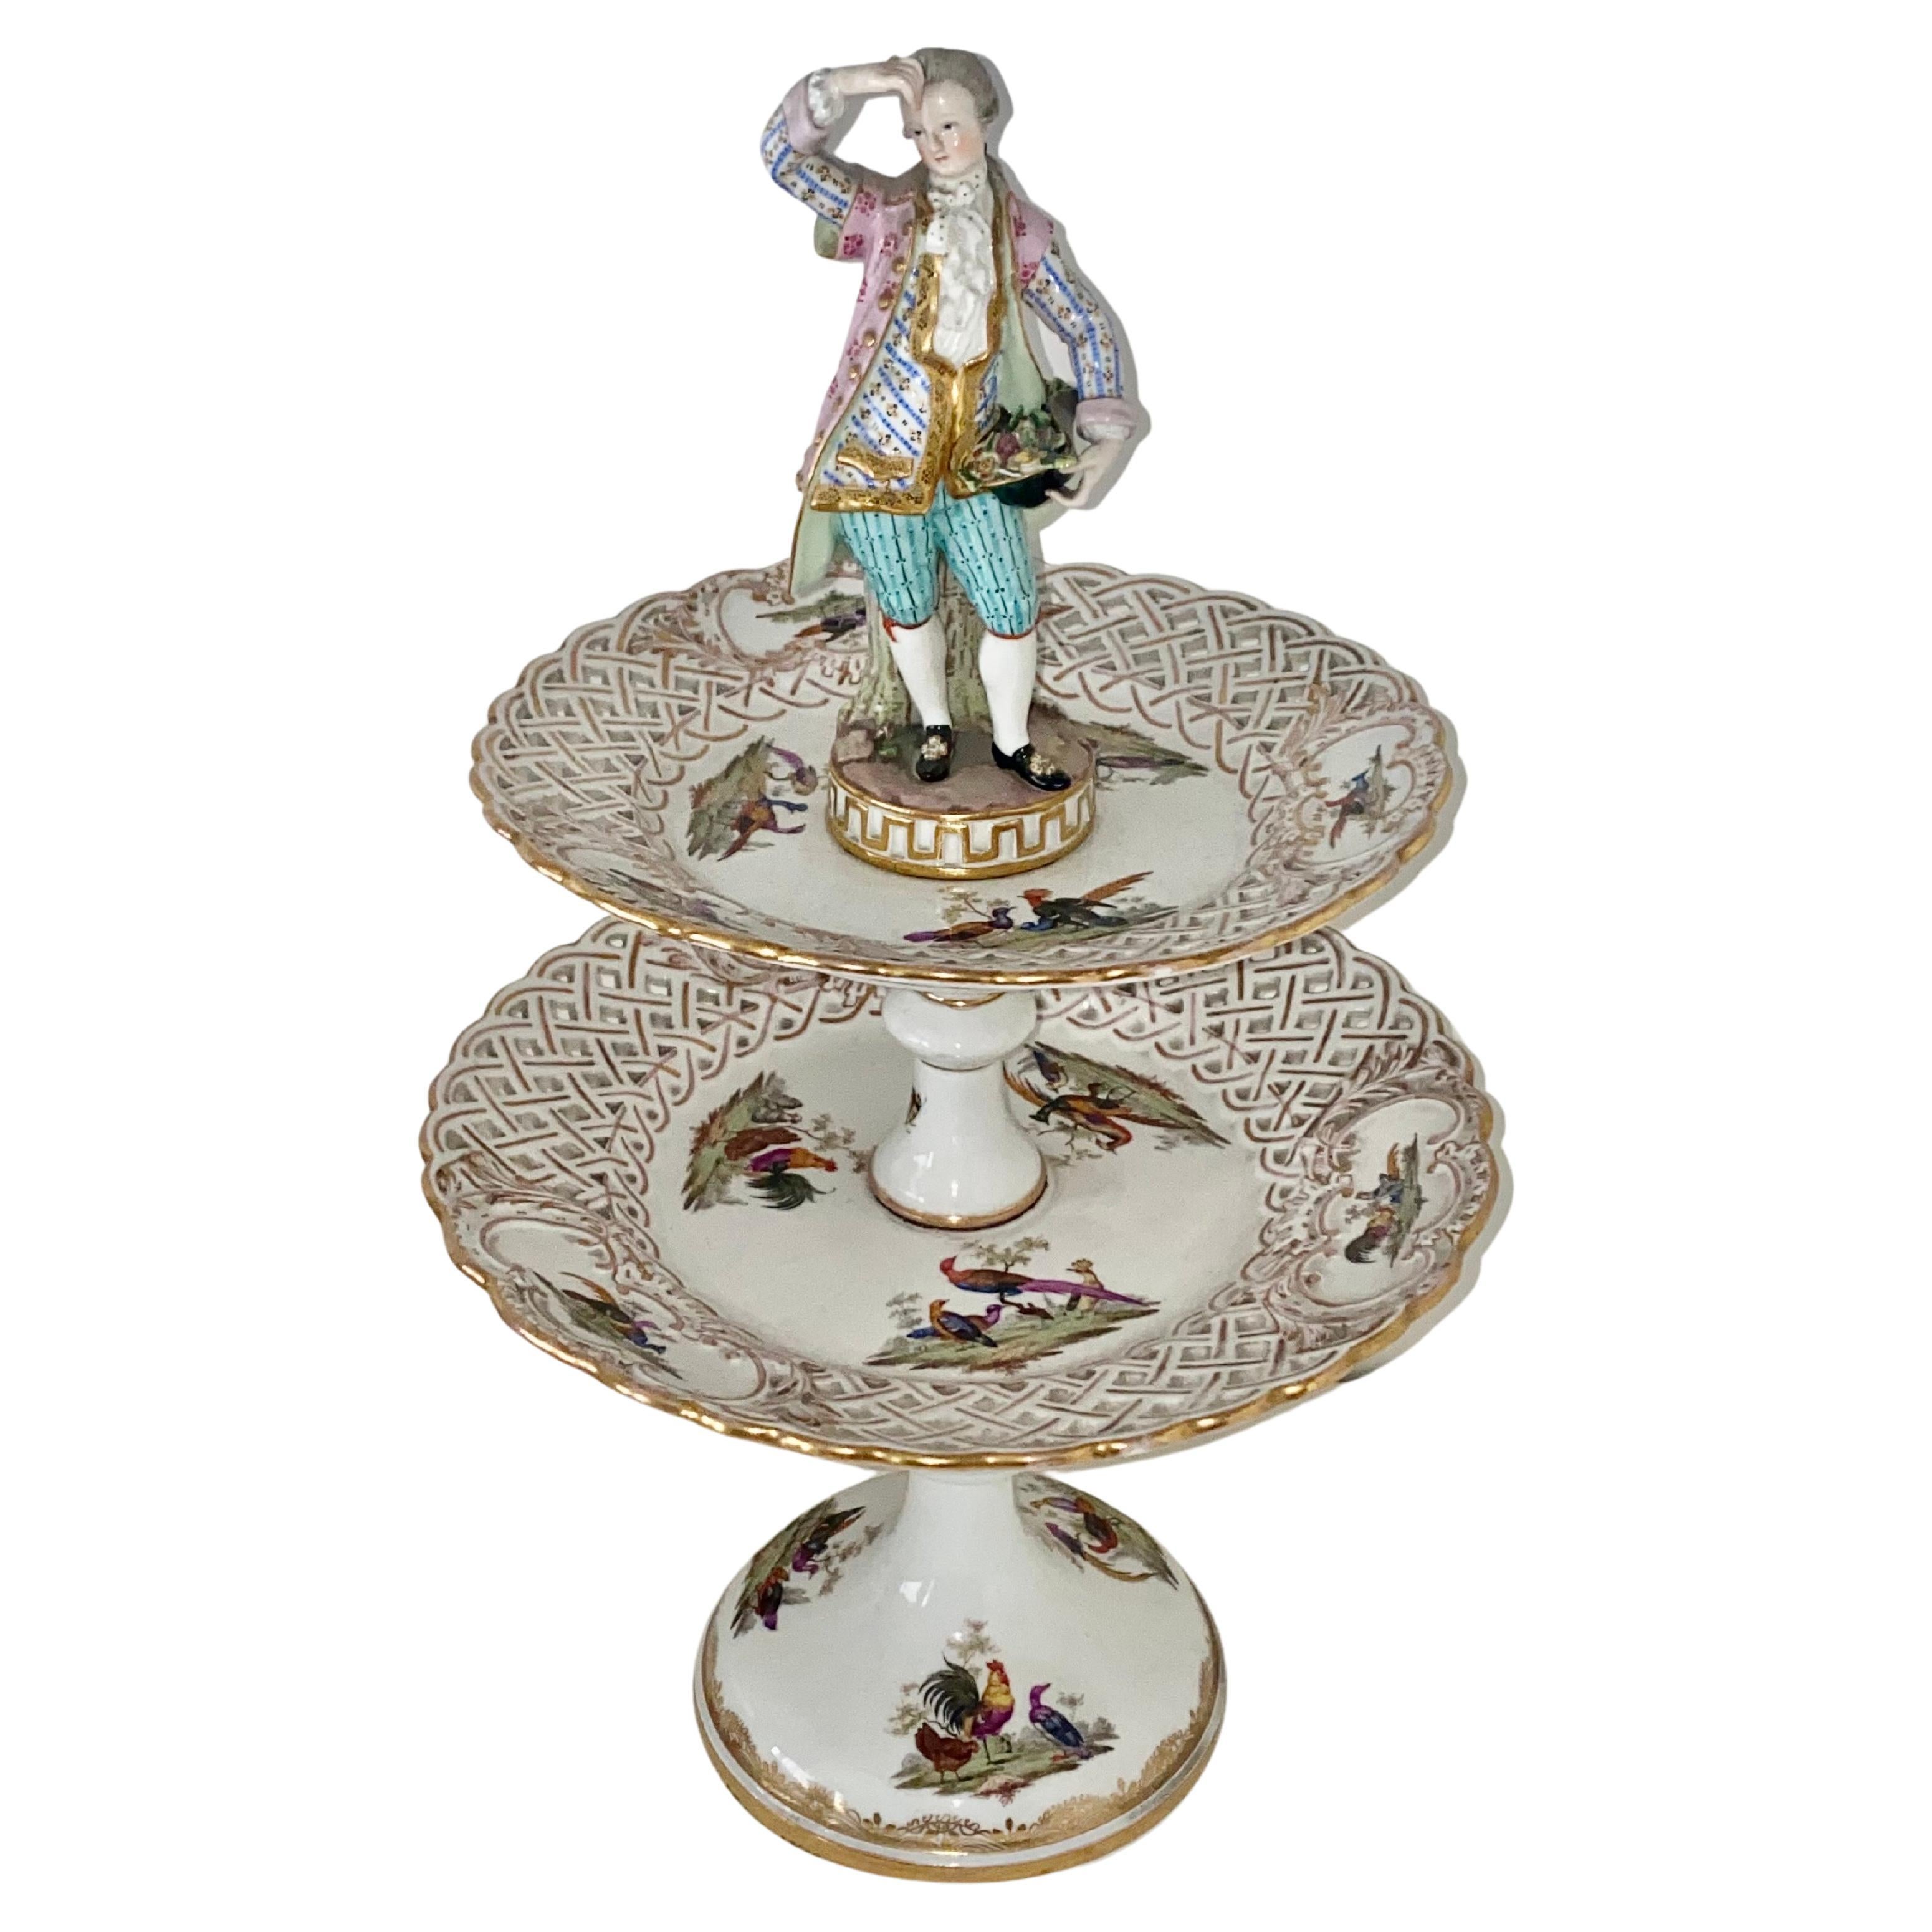 A fine quality pair of 2-tier stands with figural finials of a maiden and man. The reticulated plates and supports each painted with various types of birds, waterfowl, insects and flowers. The base is marked with the blue Meissen cross swords